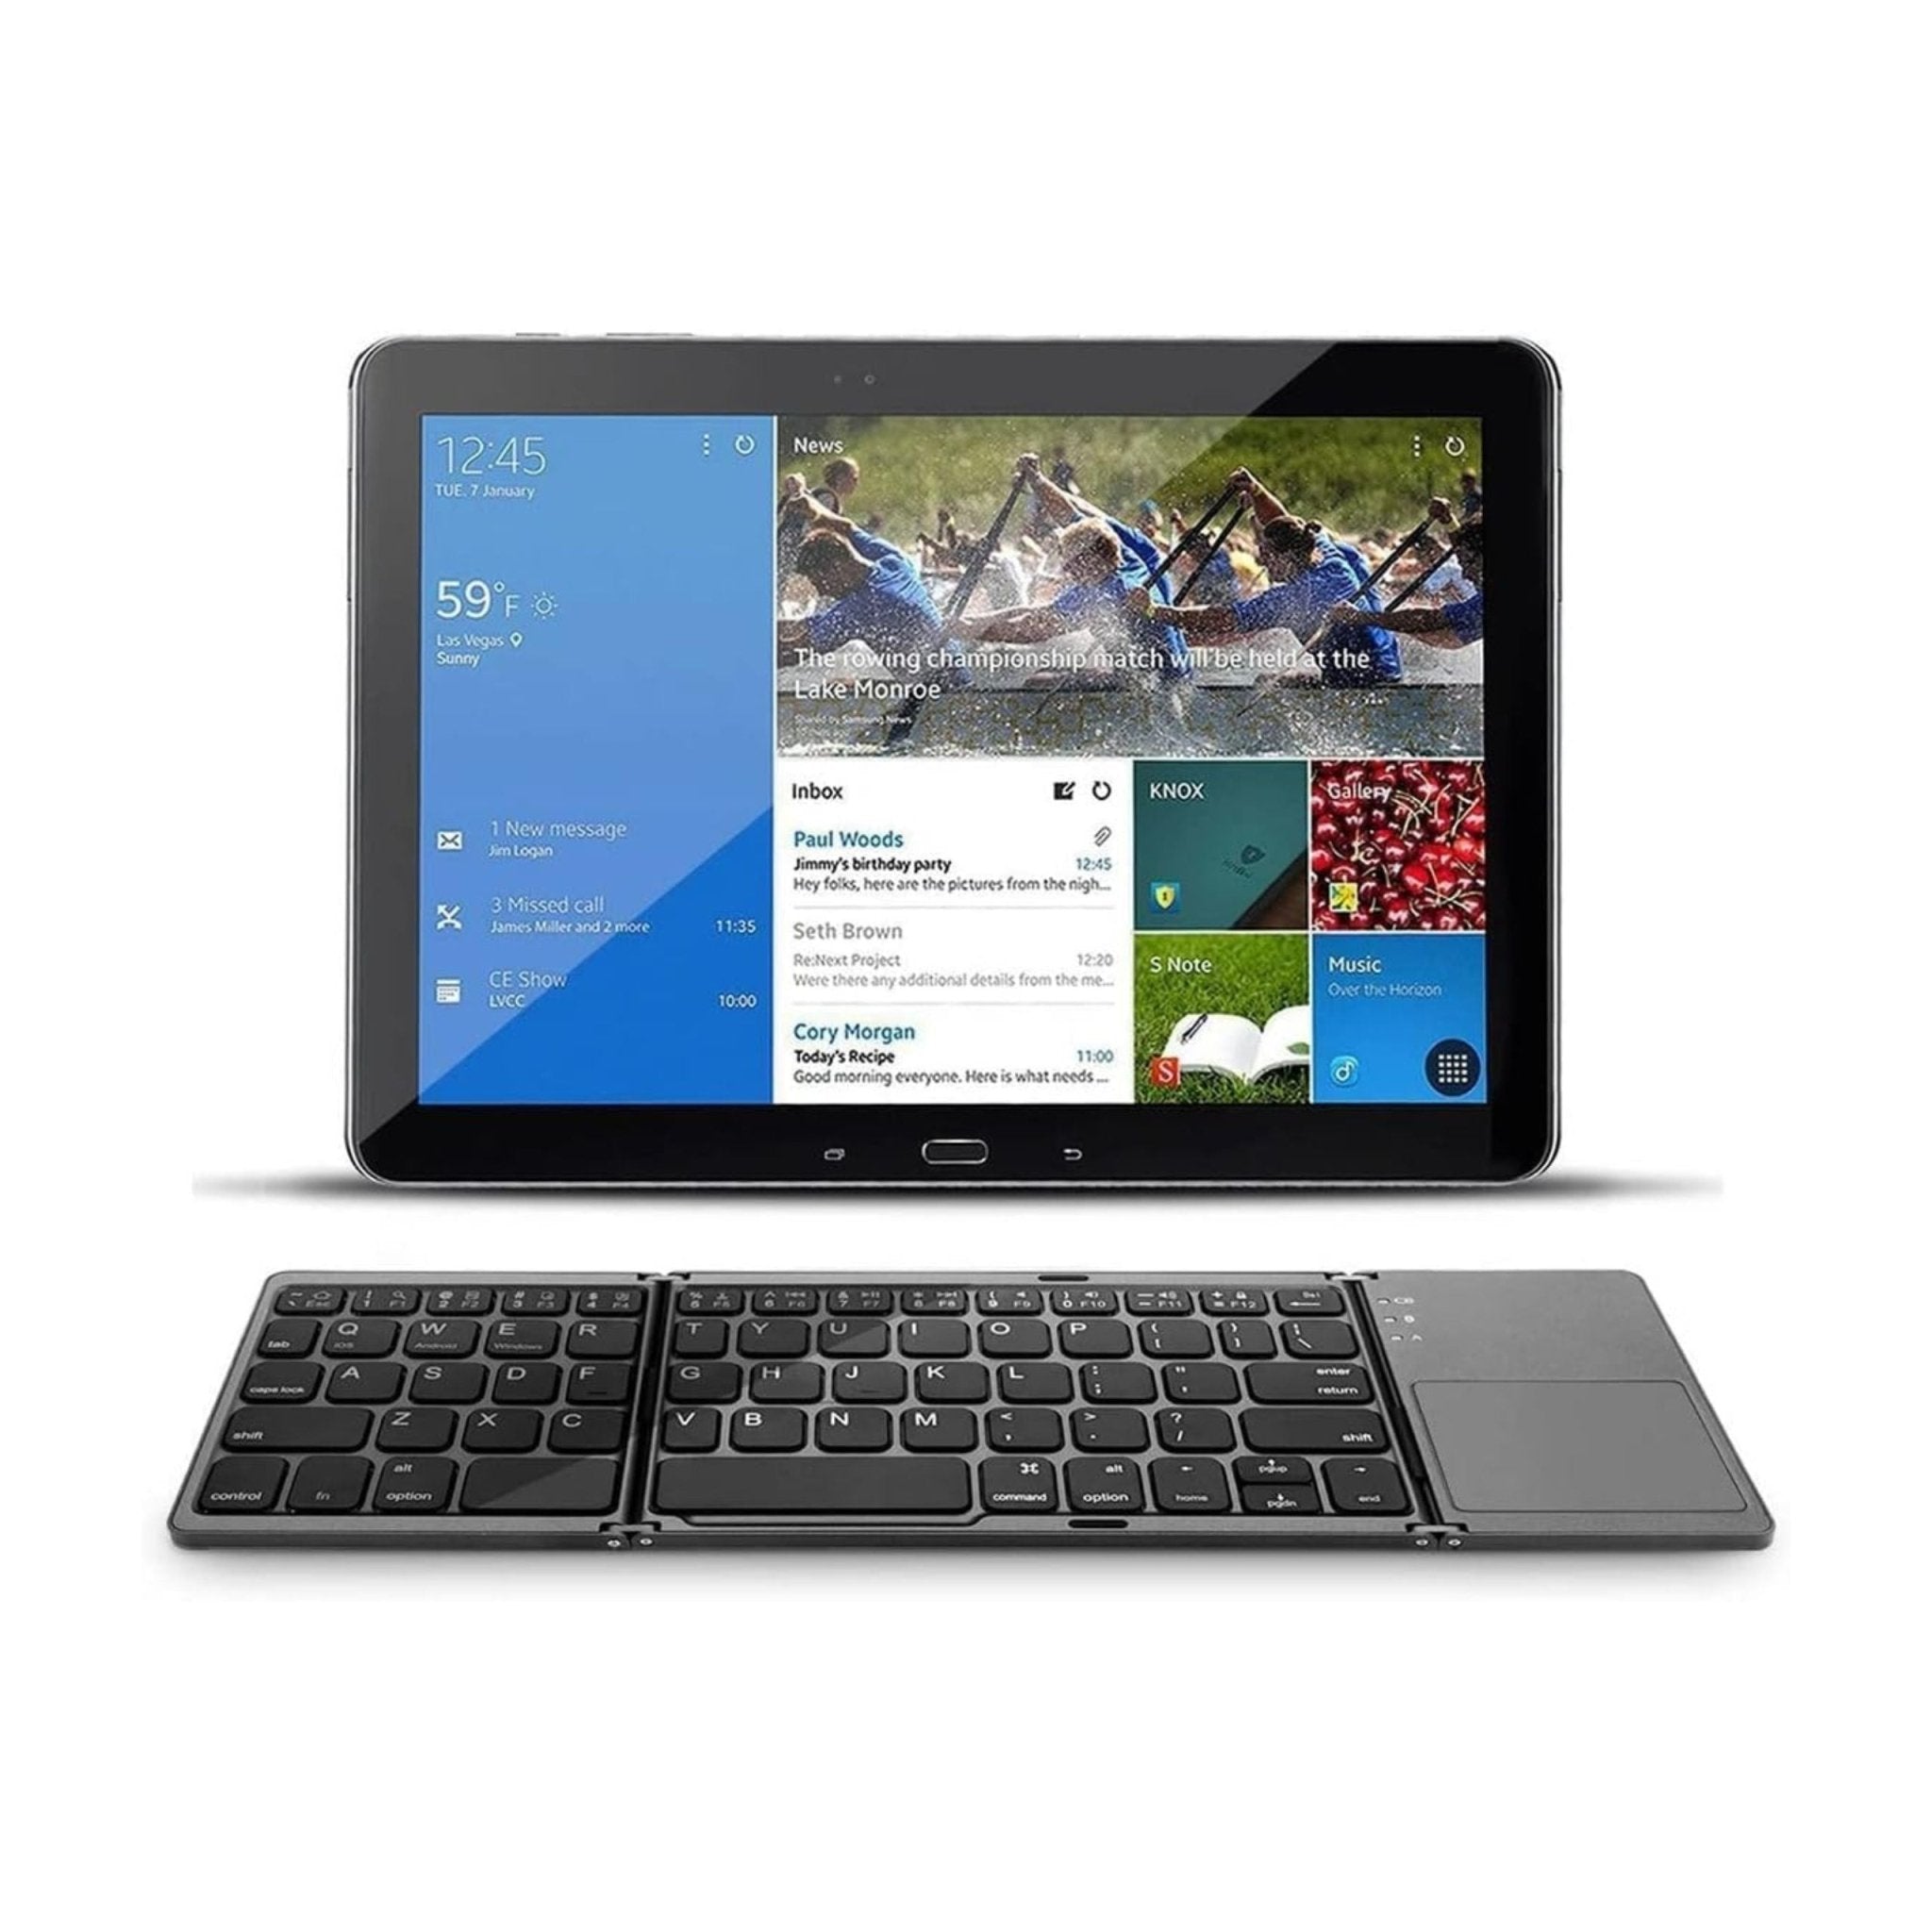 Foldable Bluetooth Keyboard With Touchpad B033 - Black